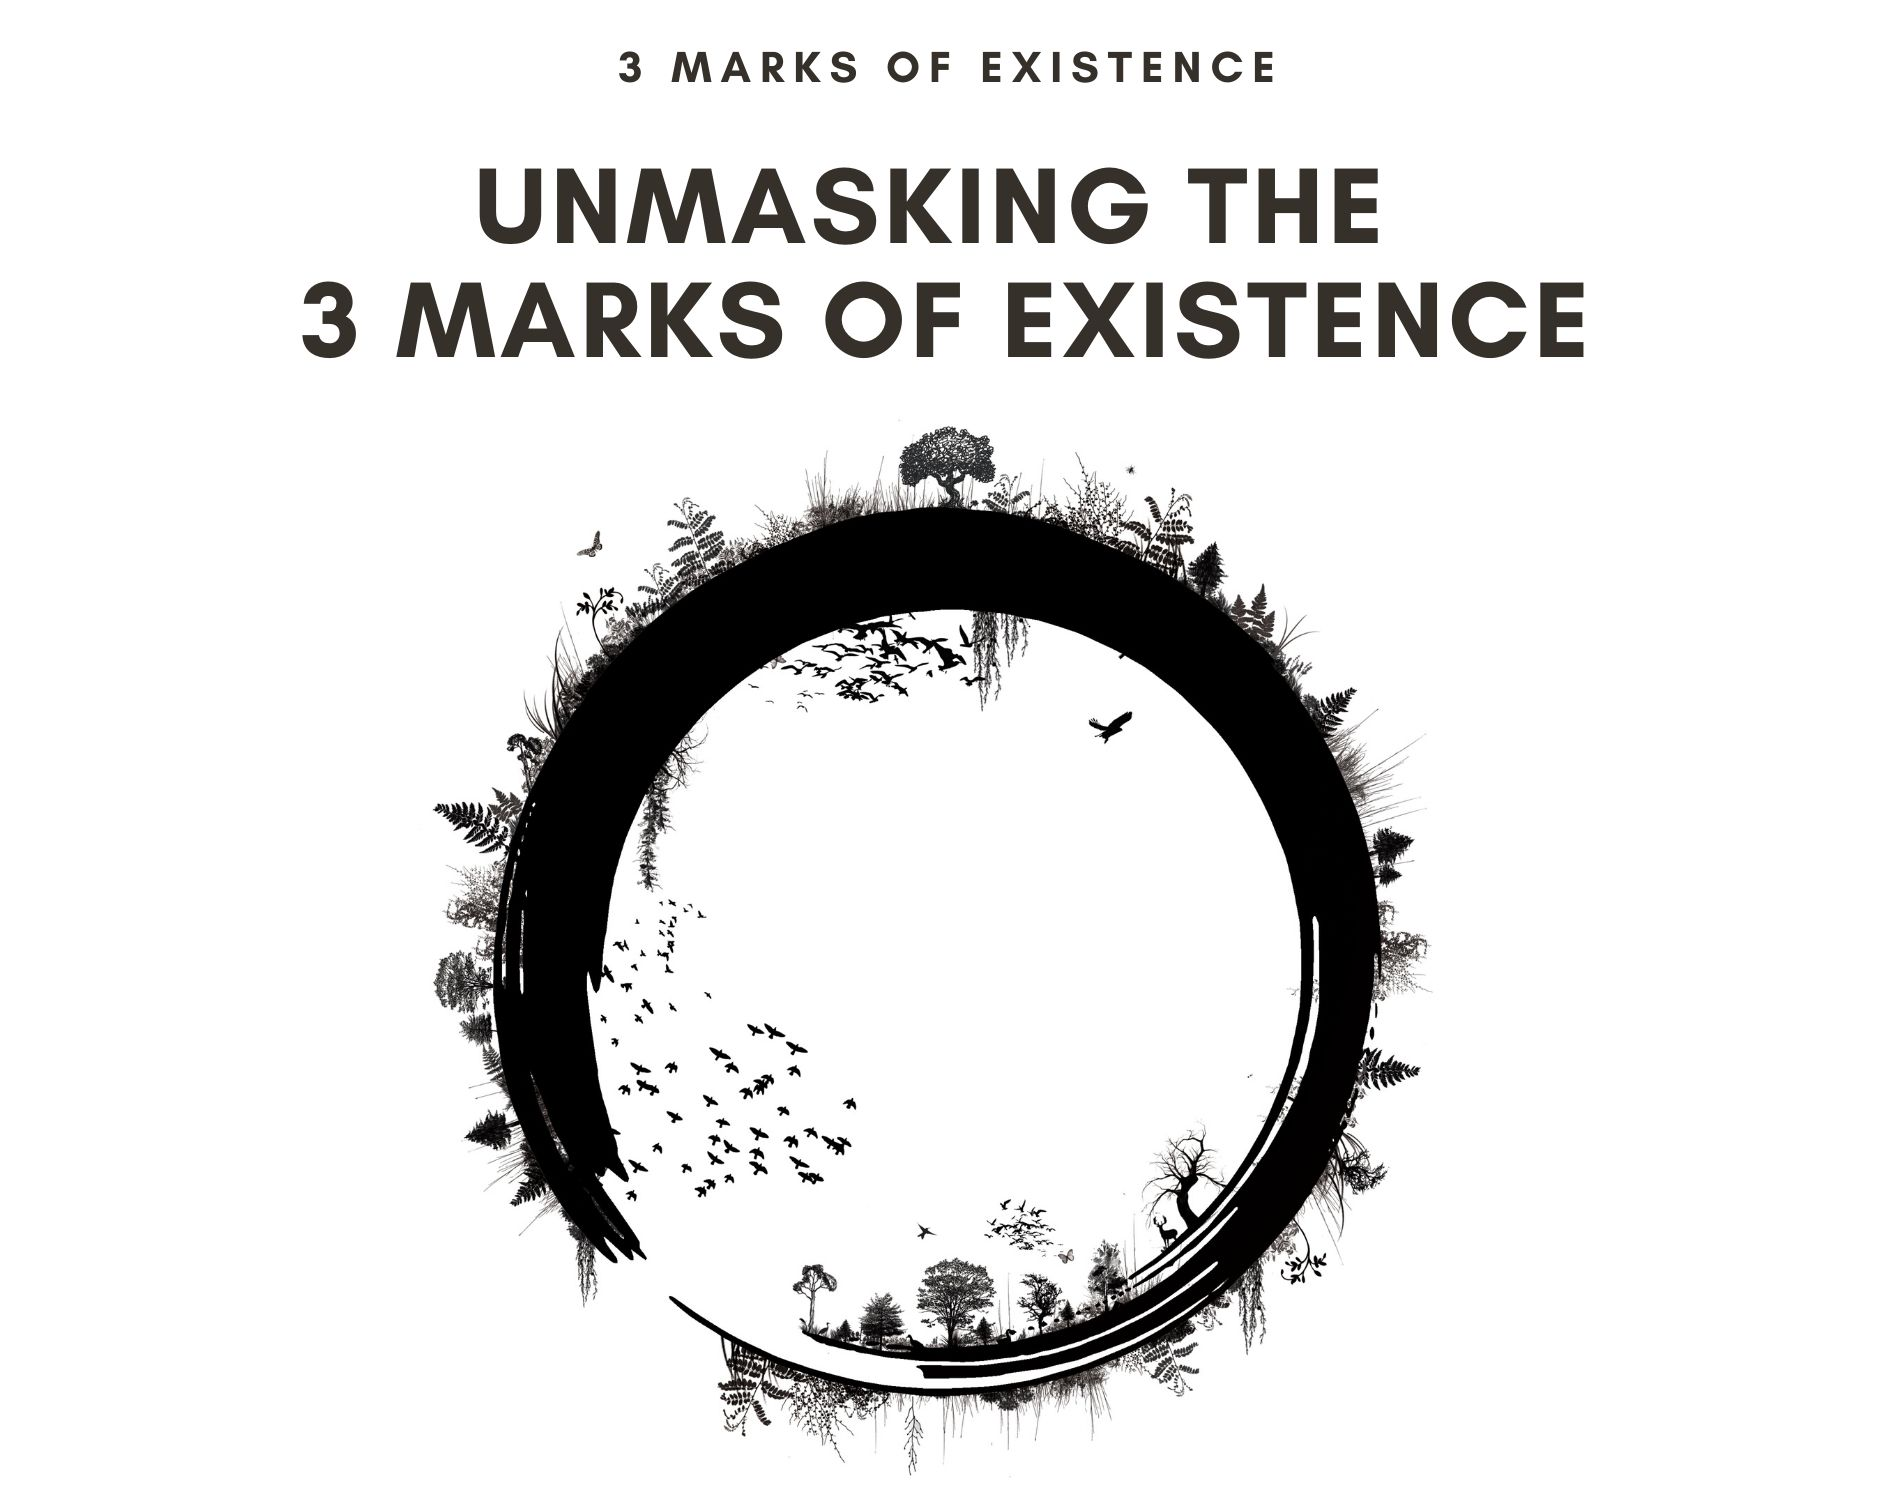 The importance of the 3 marks of existence- helpful info to know!